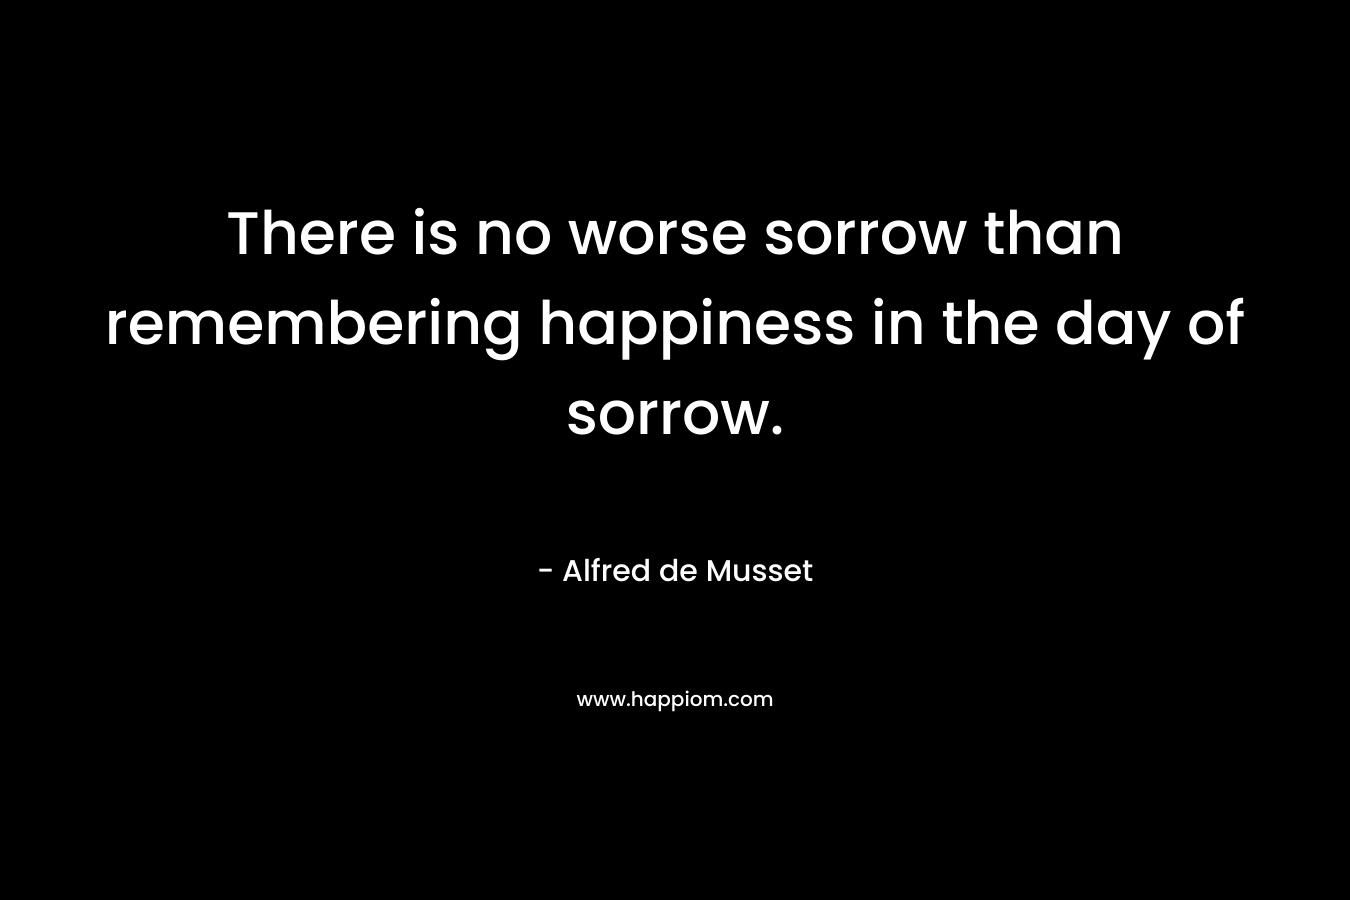 There is no worse sorrow than remembering happiness in the day of sorrow.